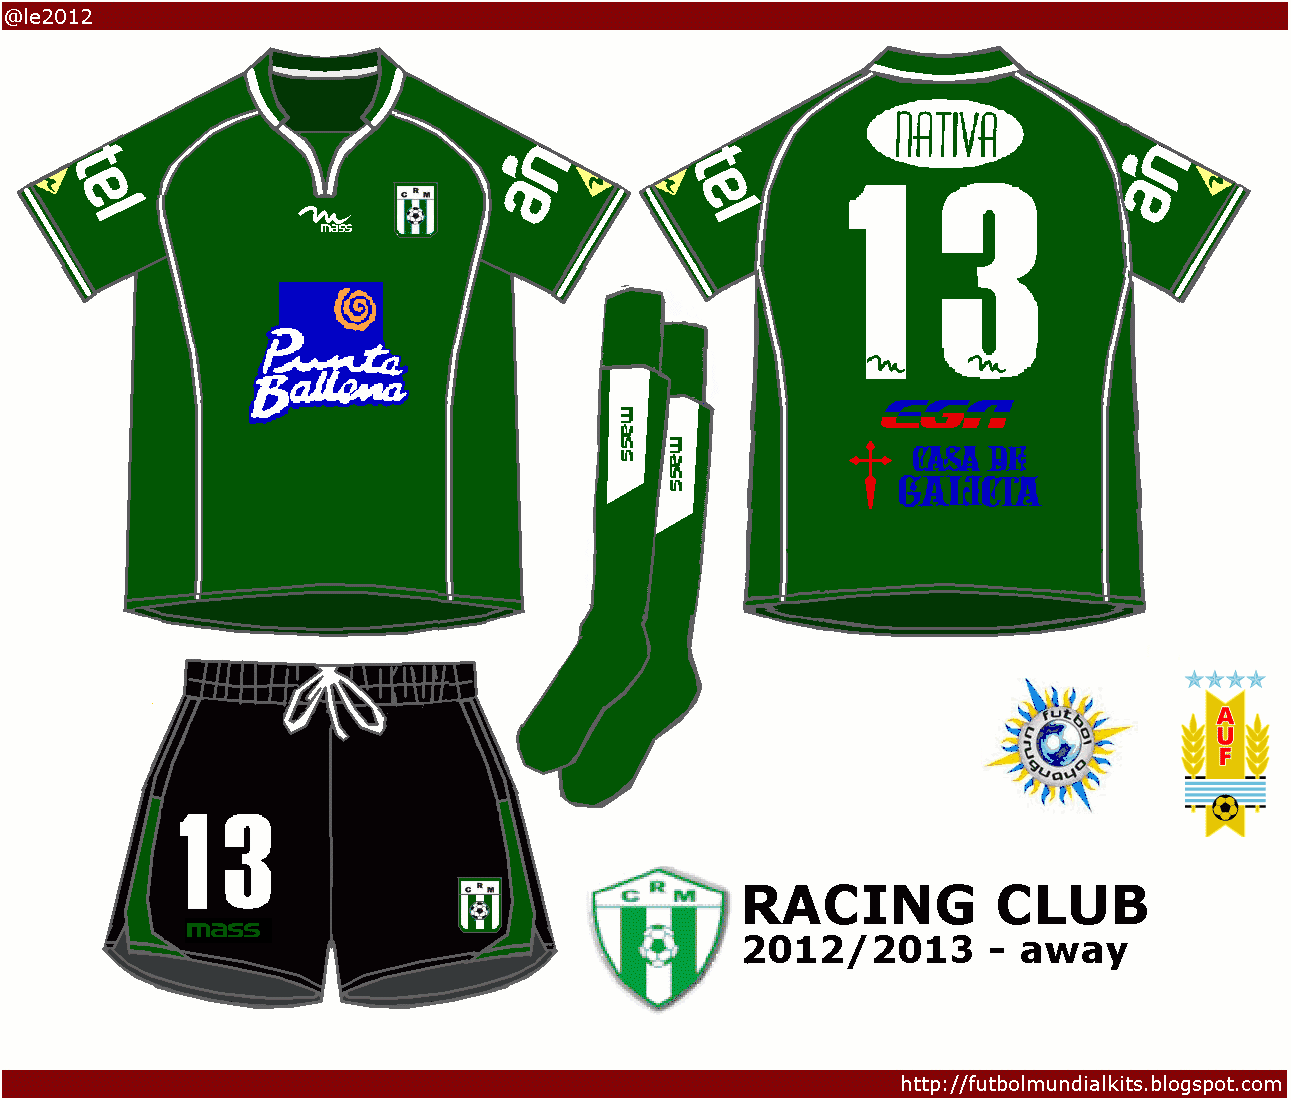 Racing Club of Montevideo home kit for 2012-13.